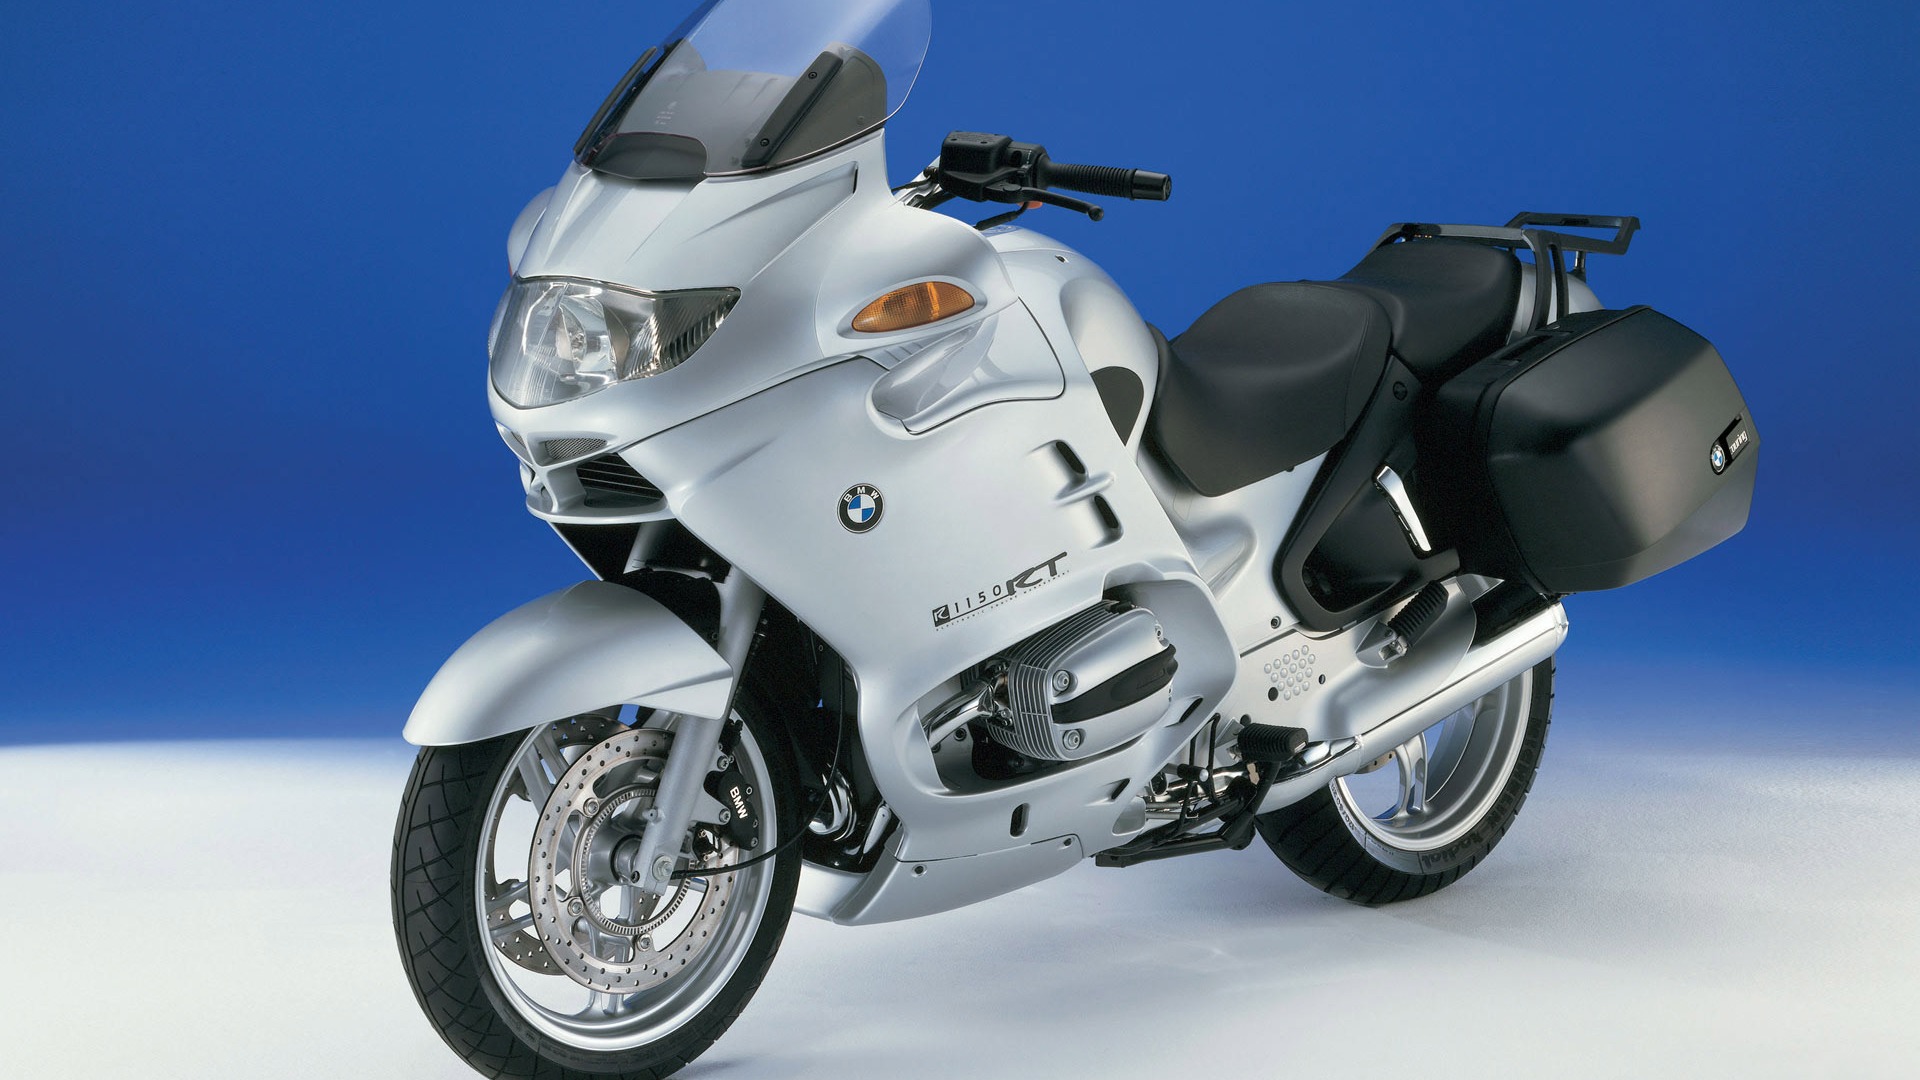 BMW motorcycle wallpapers (1) #12 - 1920x1080